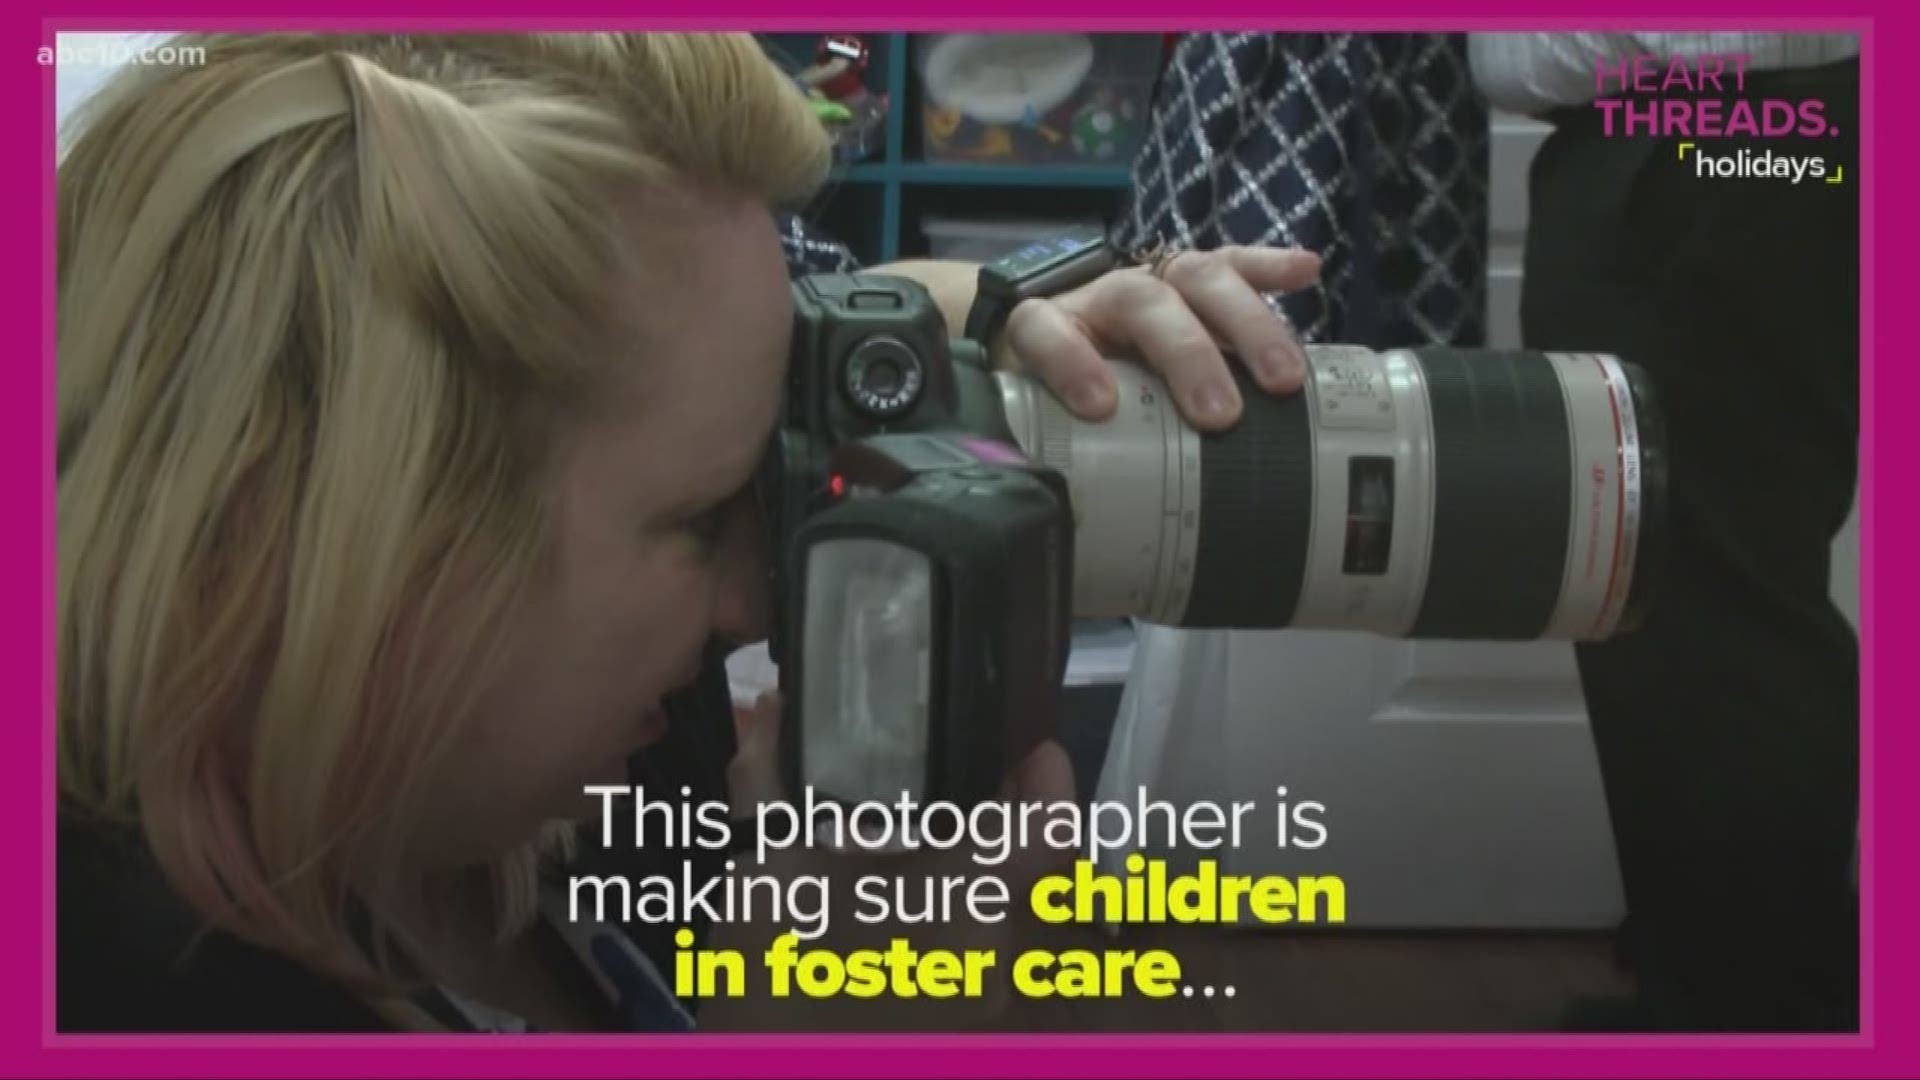 For this week's HeartThreads, ABC10 takes a look at a photographer who is working to make children happier.